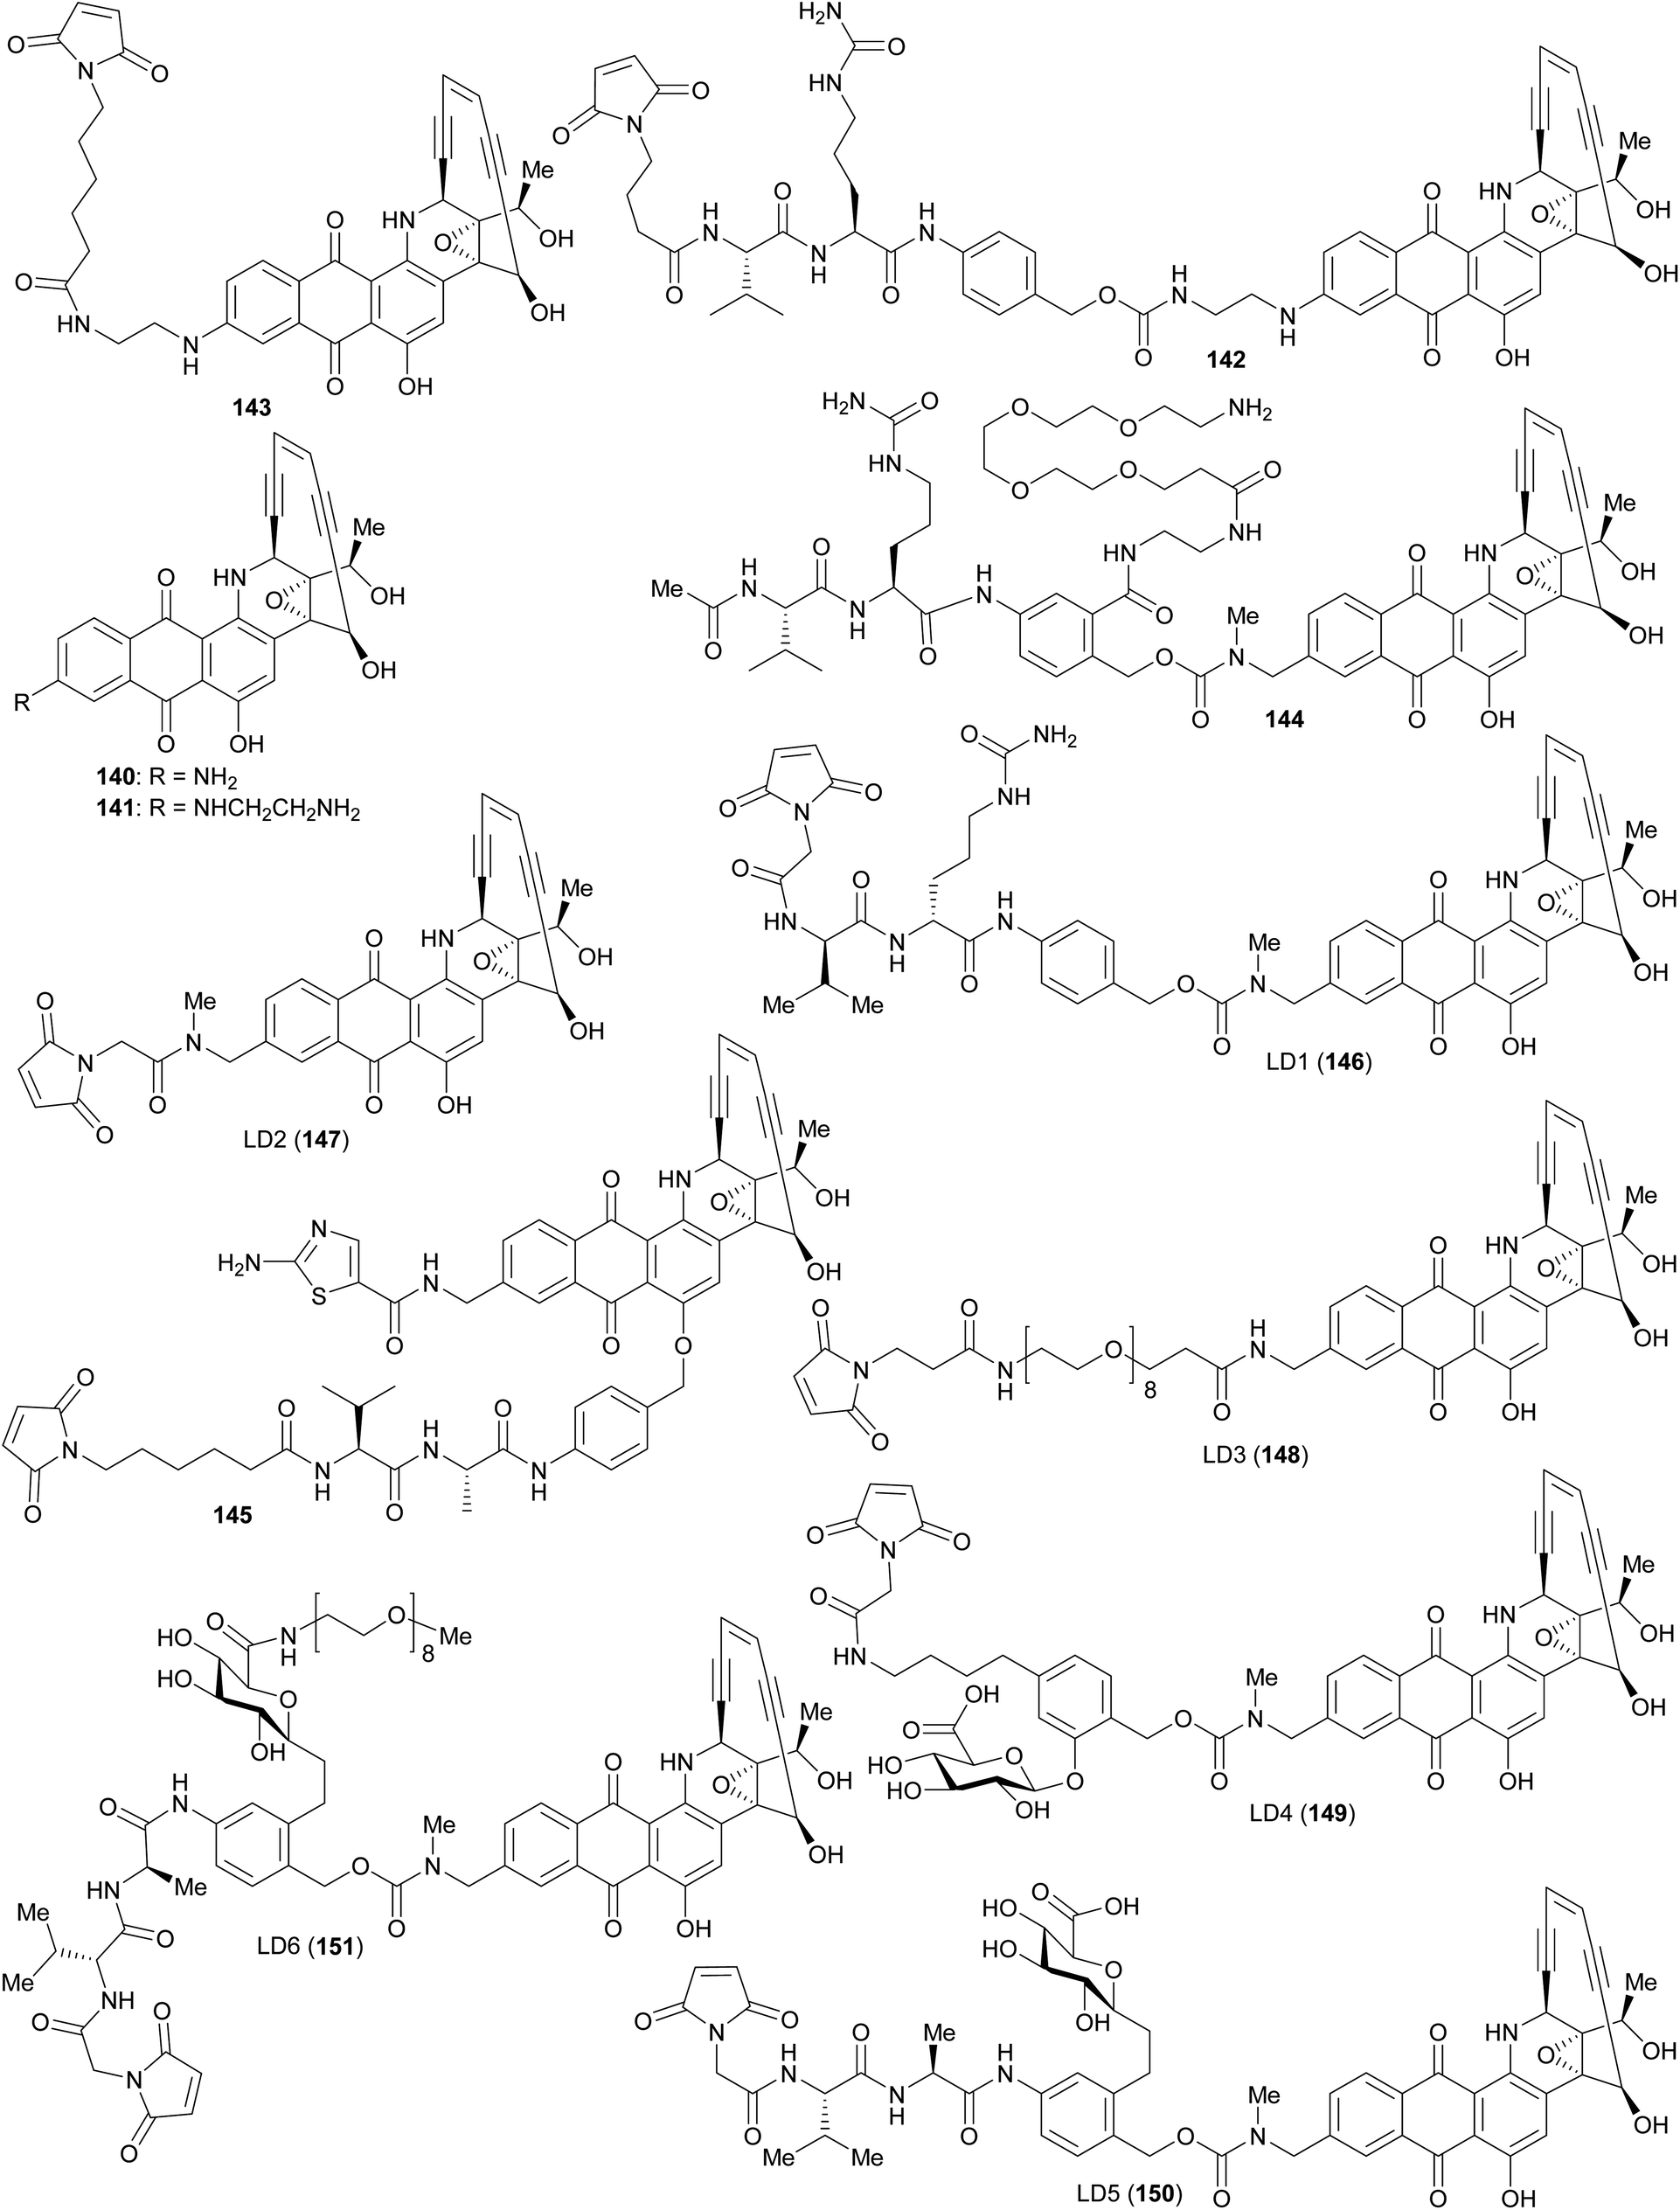 Anthraquinone-fused enediynes: discovery, biosynthesis and 